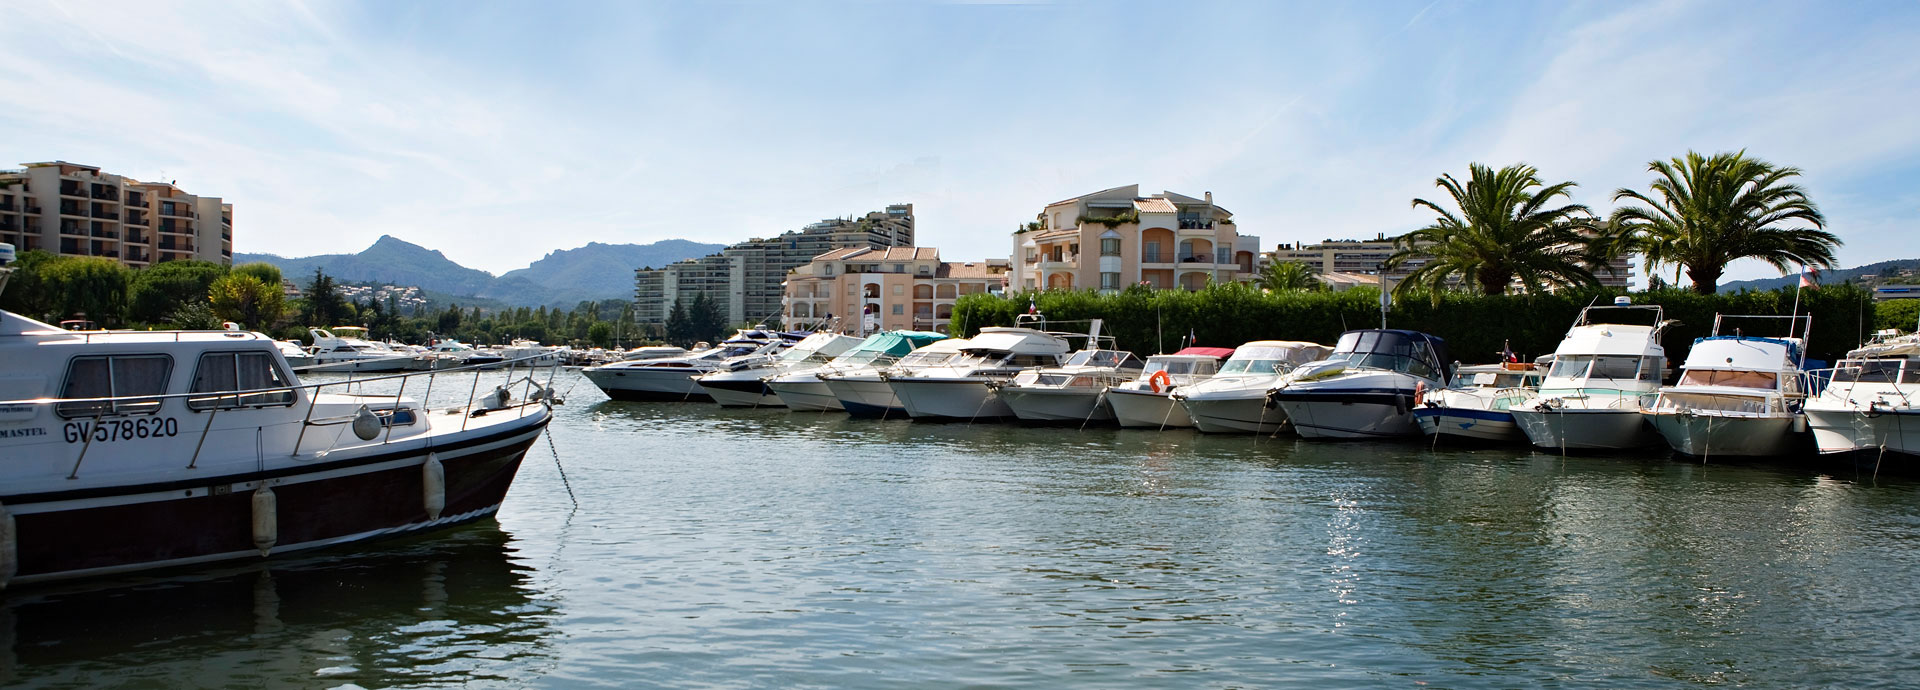 Cannes Mandelieu-la-Napoule on the French Riviera : Holiday rental in Alpes-Maritimes